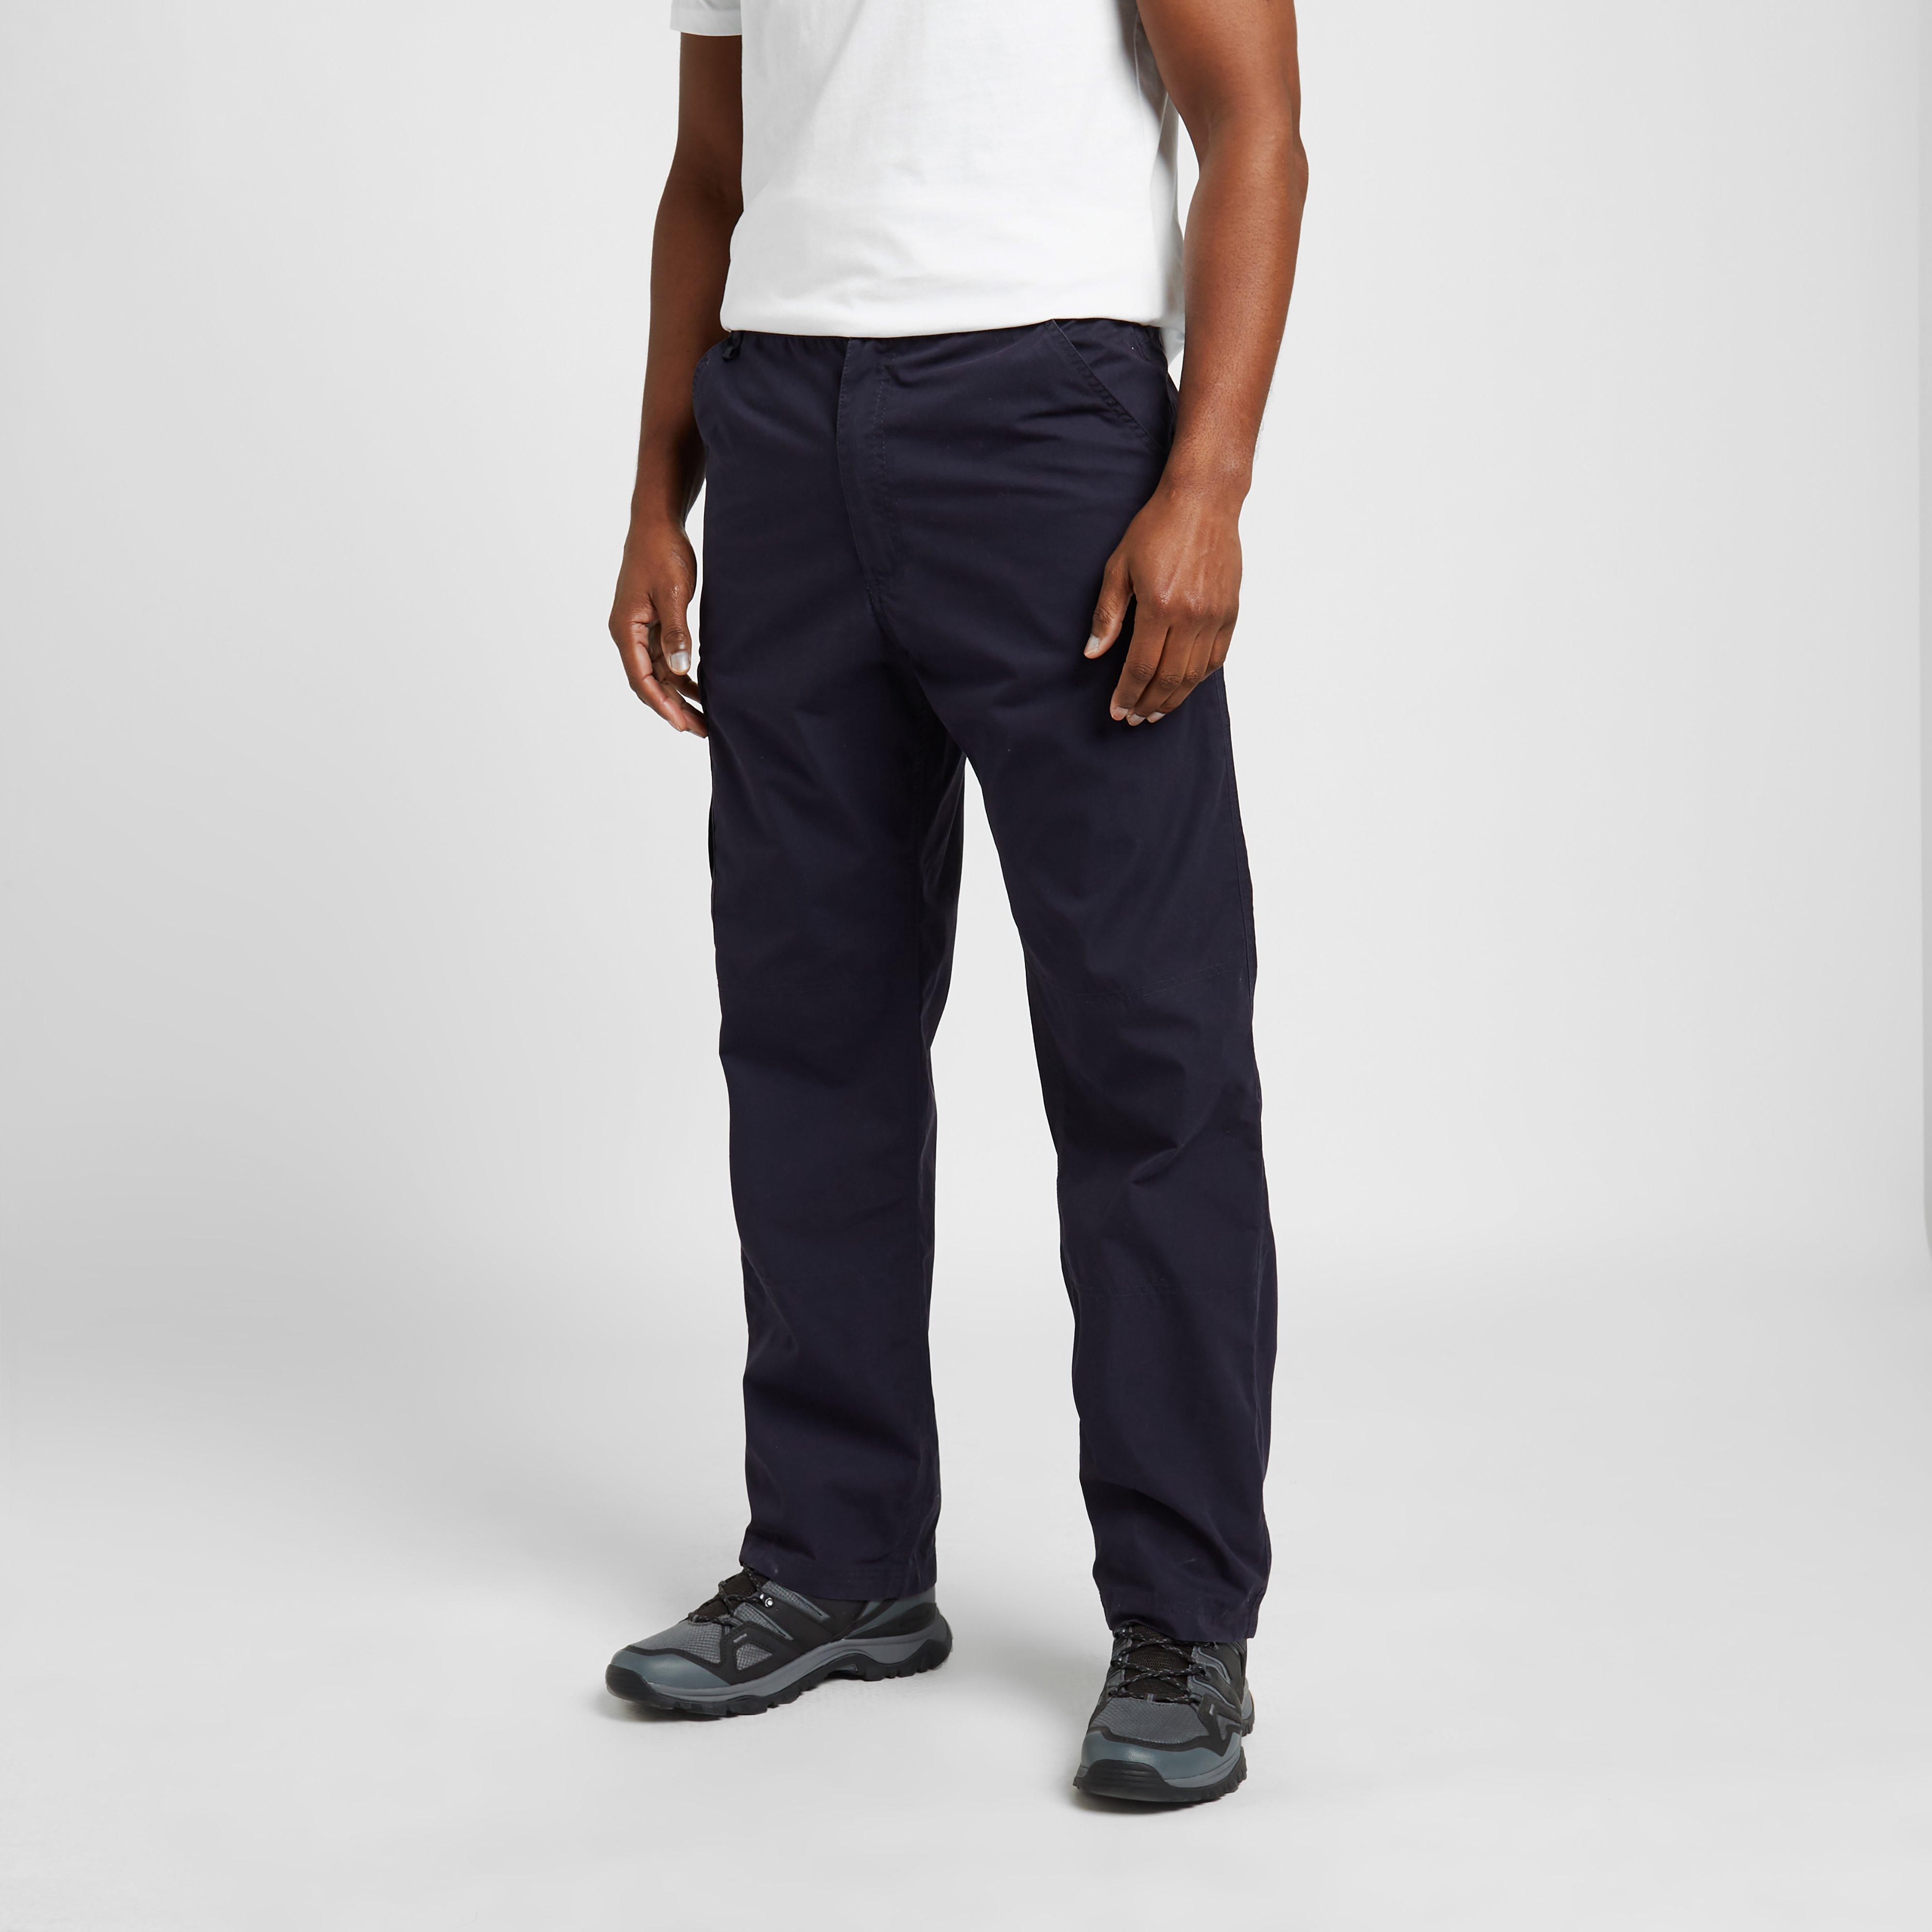 Craghoppers Mens Base Camp Trousers - Navy/navy  Navy/navy